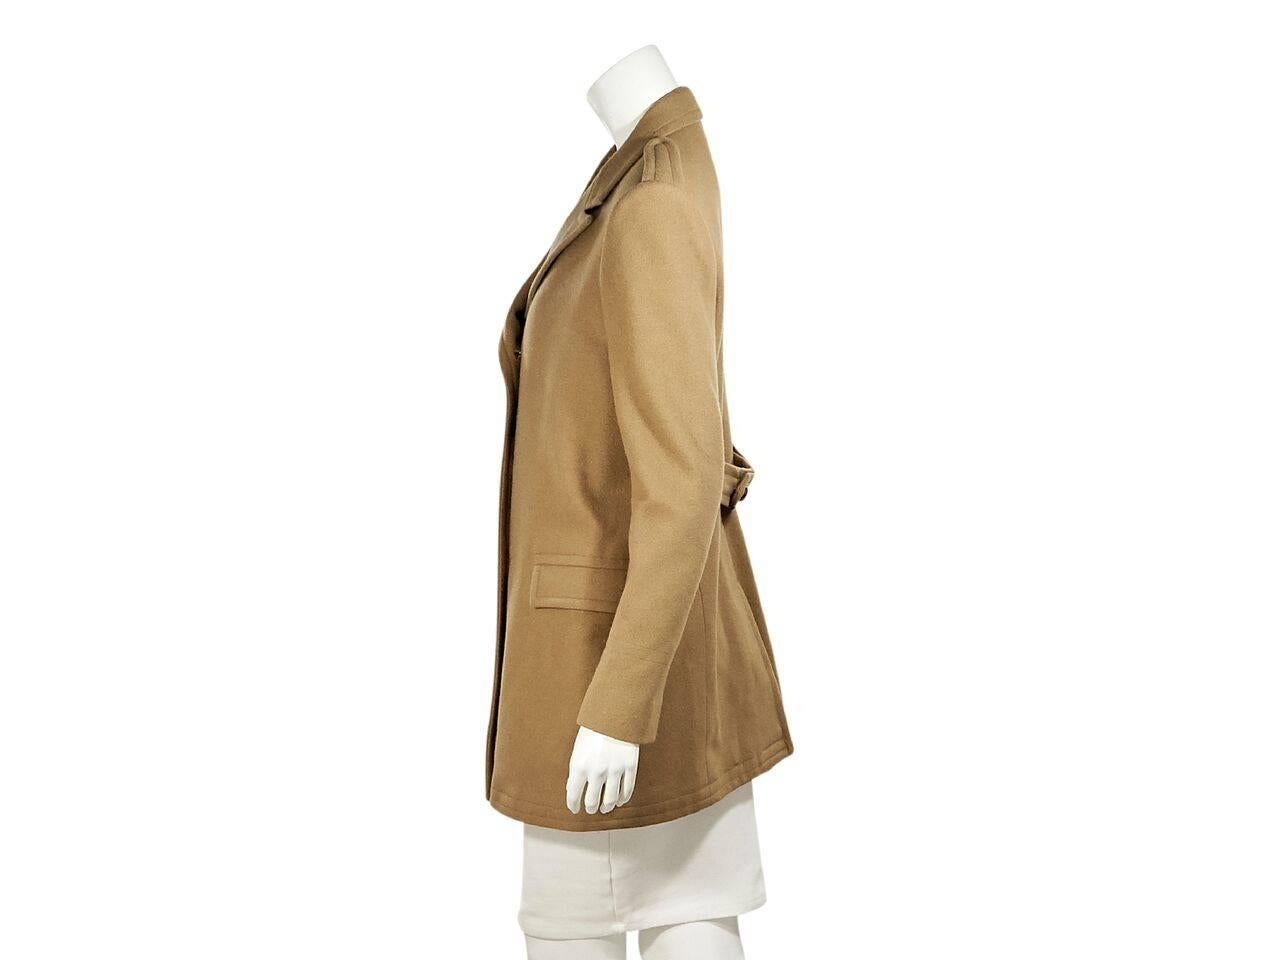 Product details:  Camel double-breasted coat by Boy. By Band Of Outsiders.  Peak lapel.  Long sleeves.  Double-breasted button-front closure.  Waist flap pockets.  Back hem vent.  Label size 4. 
Condition: Pre-owned. Very good.
Est. Retail $ 1,095.00